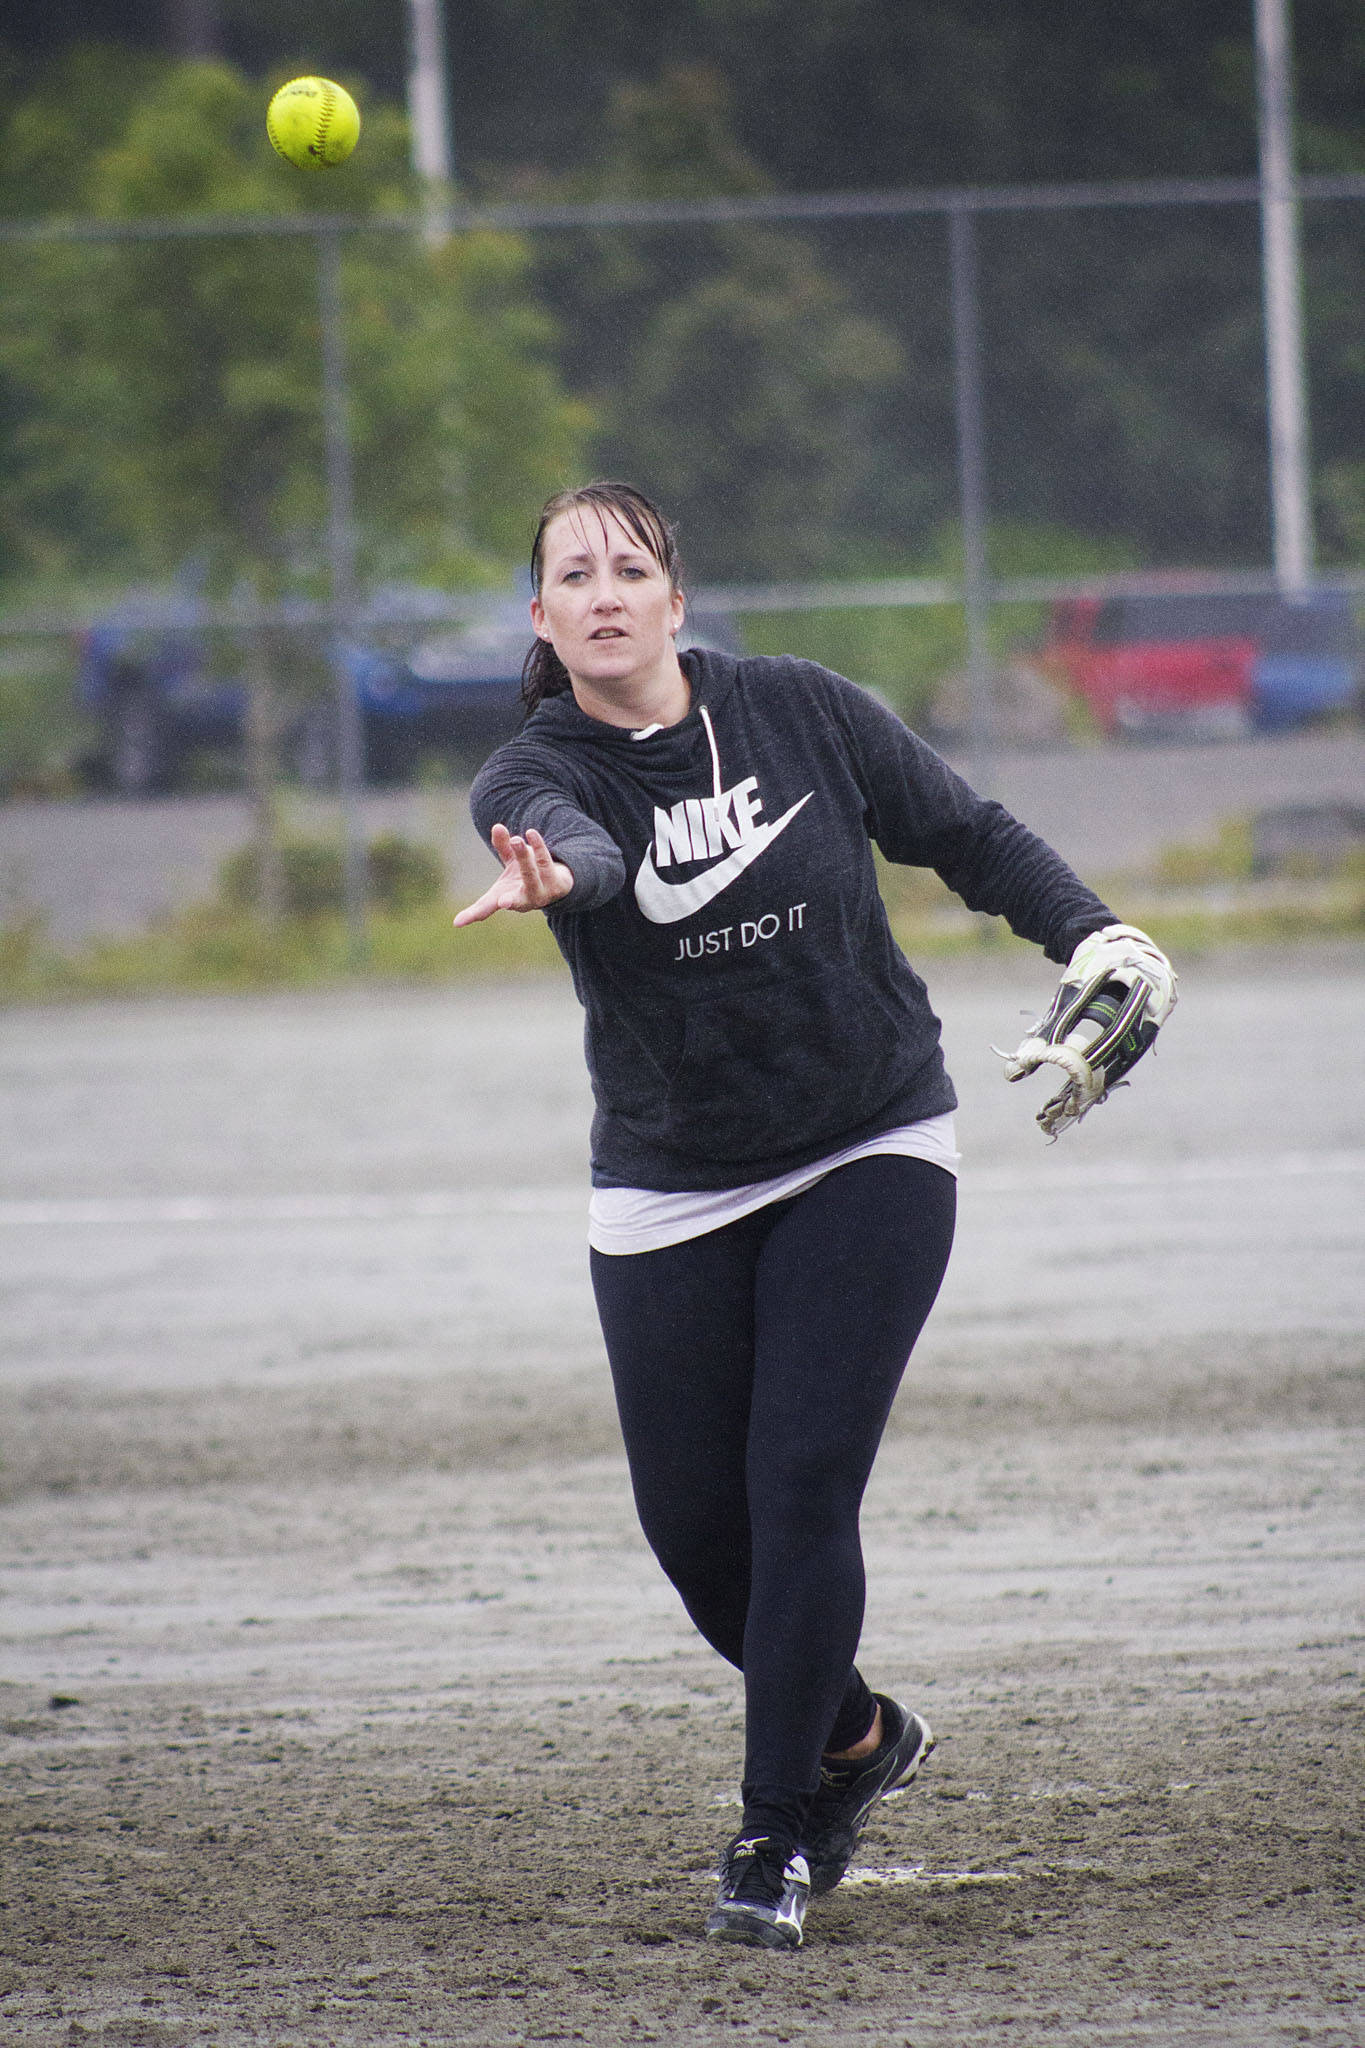 Lilly Schramm pitches during the 22nd Annual Coed Softball Benefit Tournament over the weekend. (Courtesy Photo | Katie Damien)